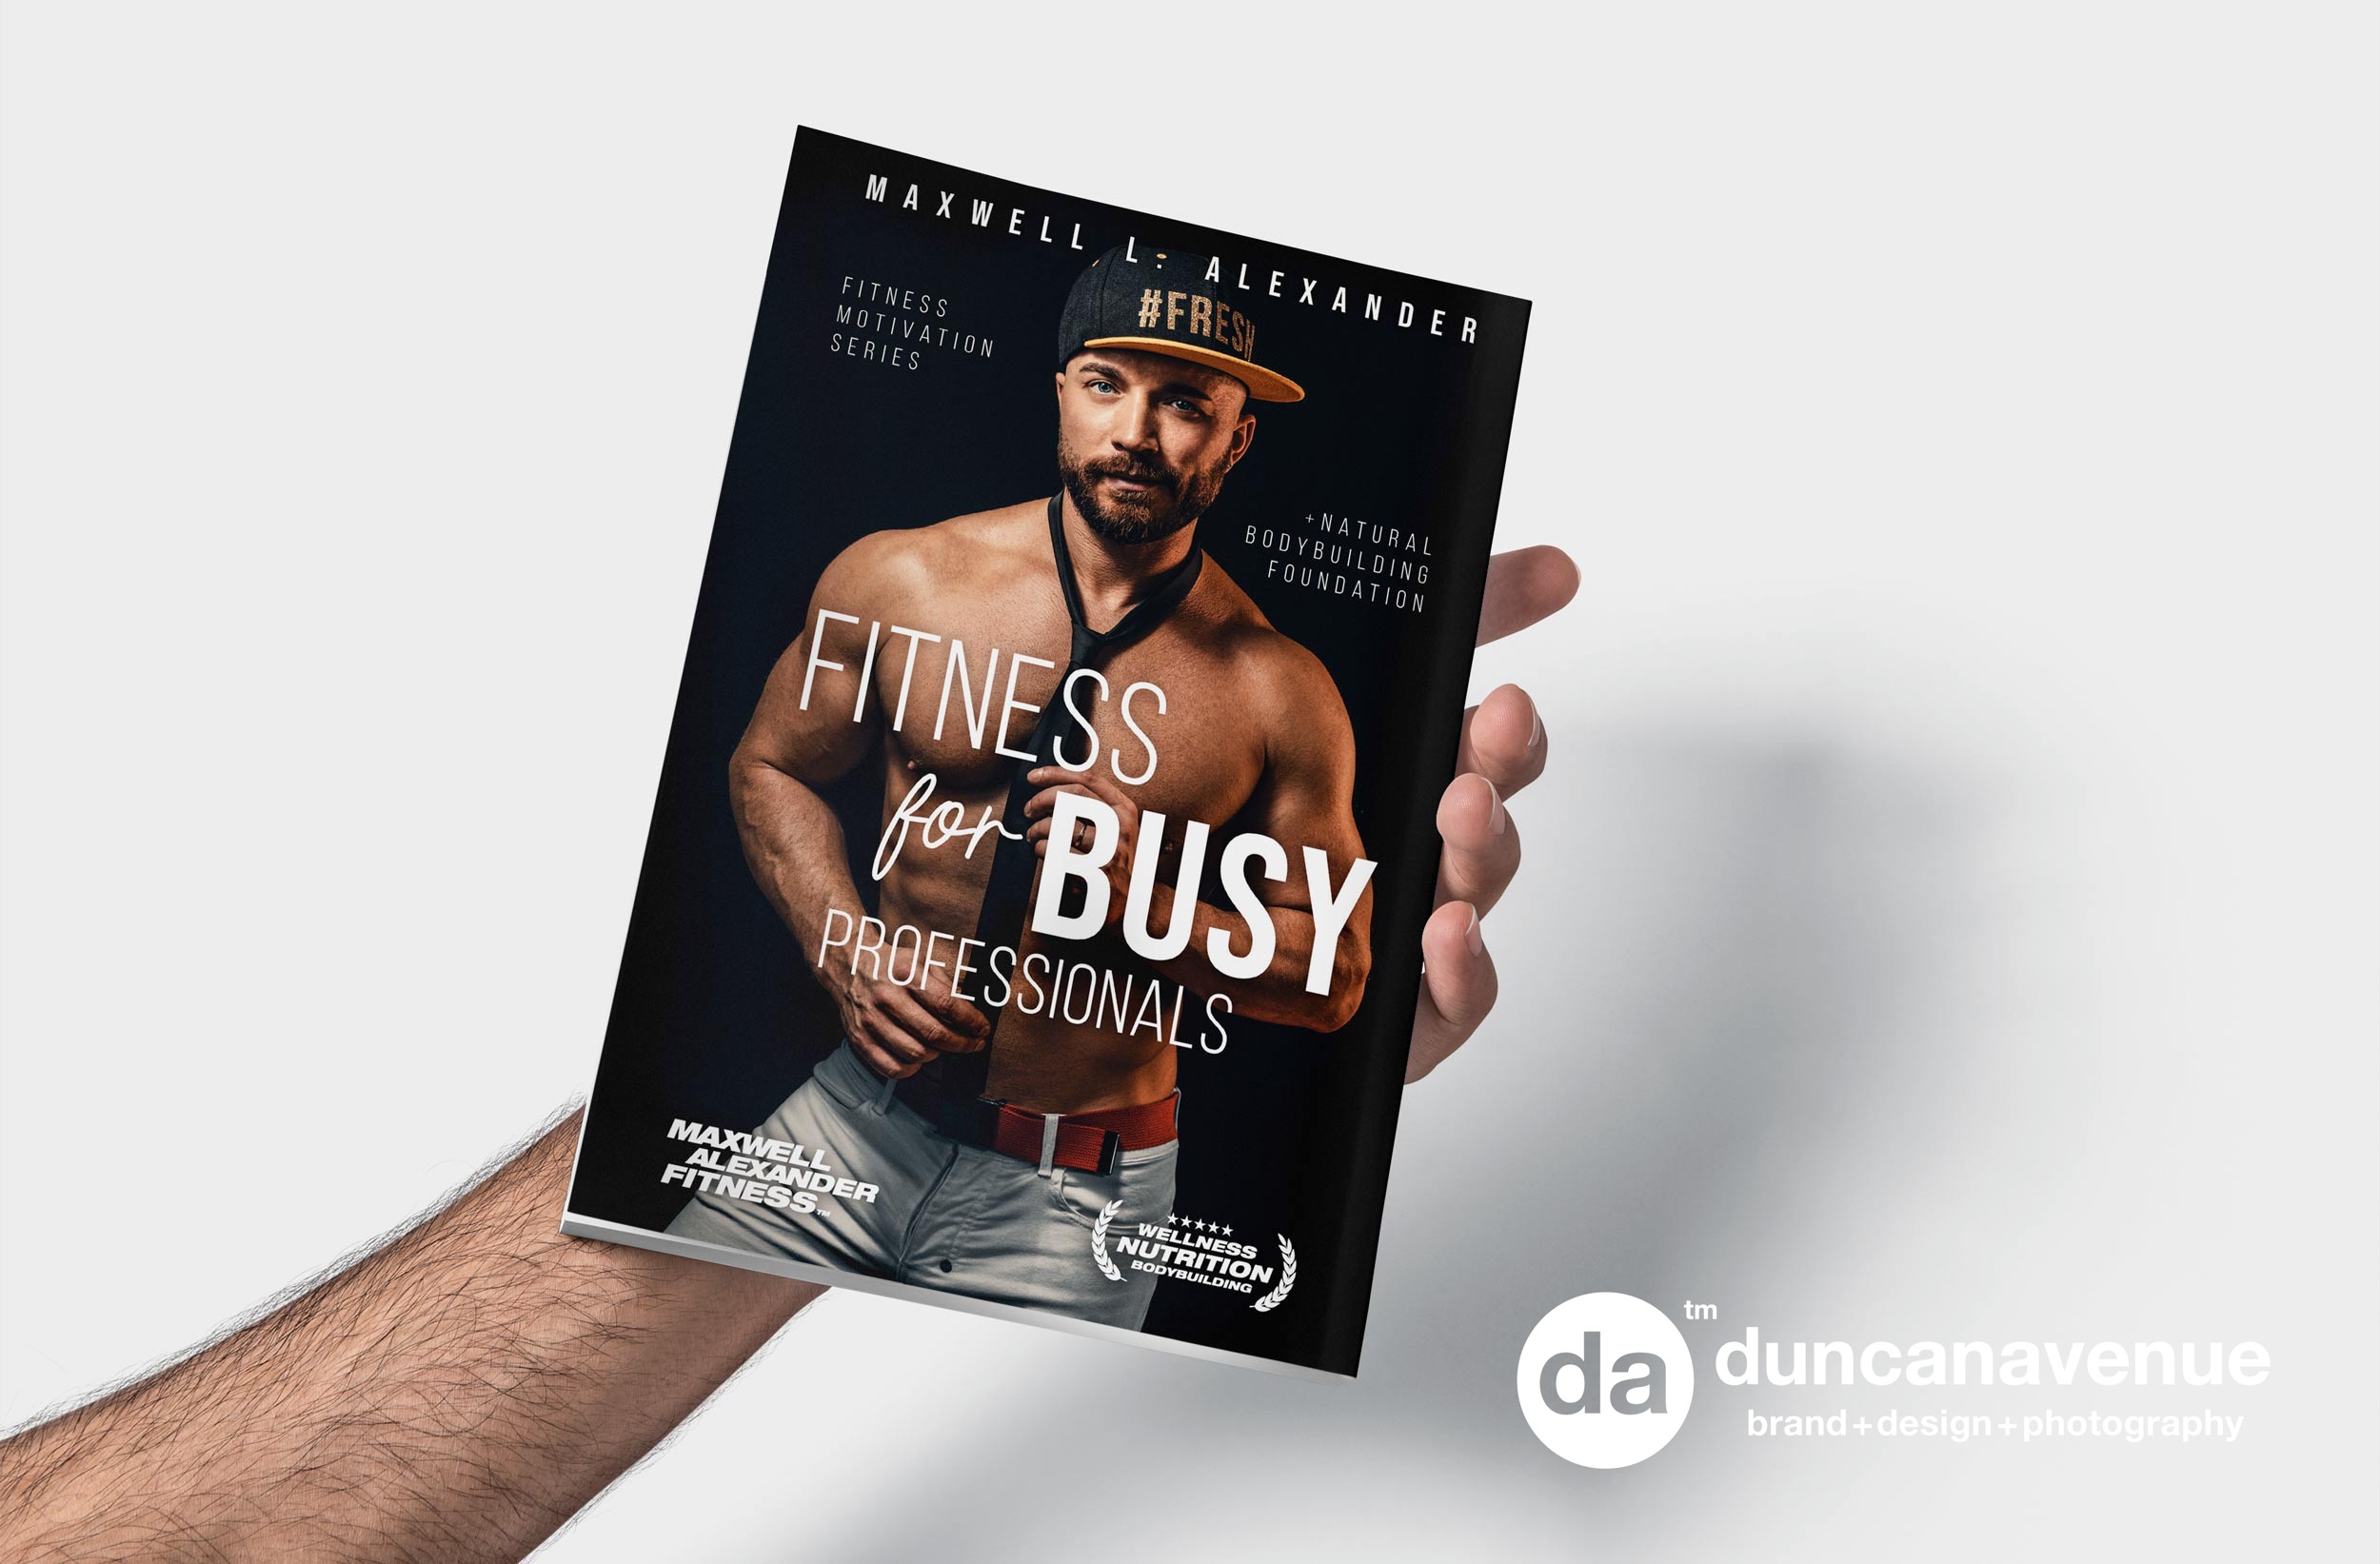 Fitness for Busy Professionals – New Fitness Motivation Book by Maxwell Alexander